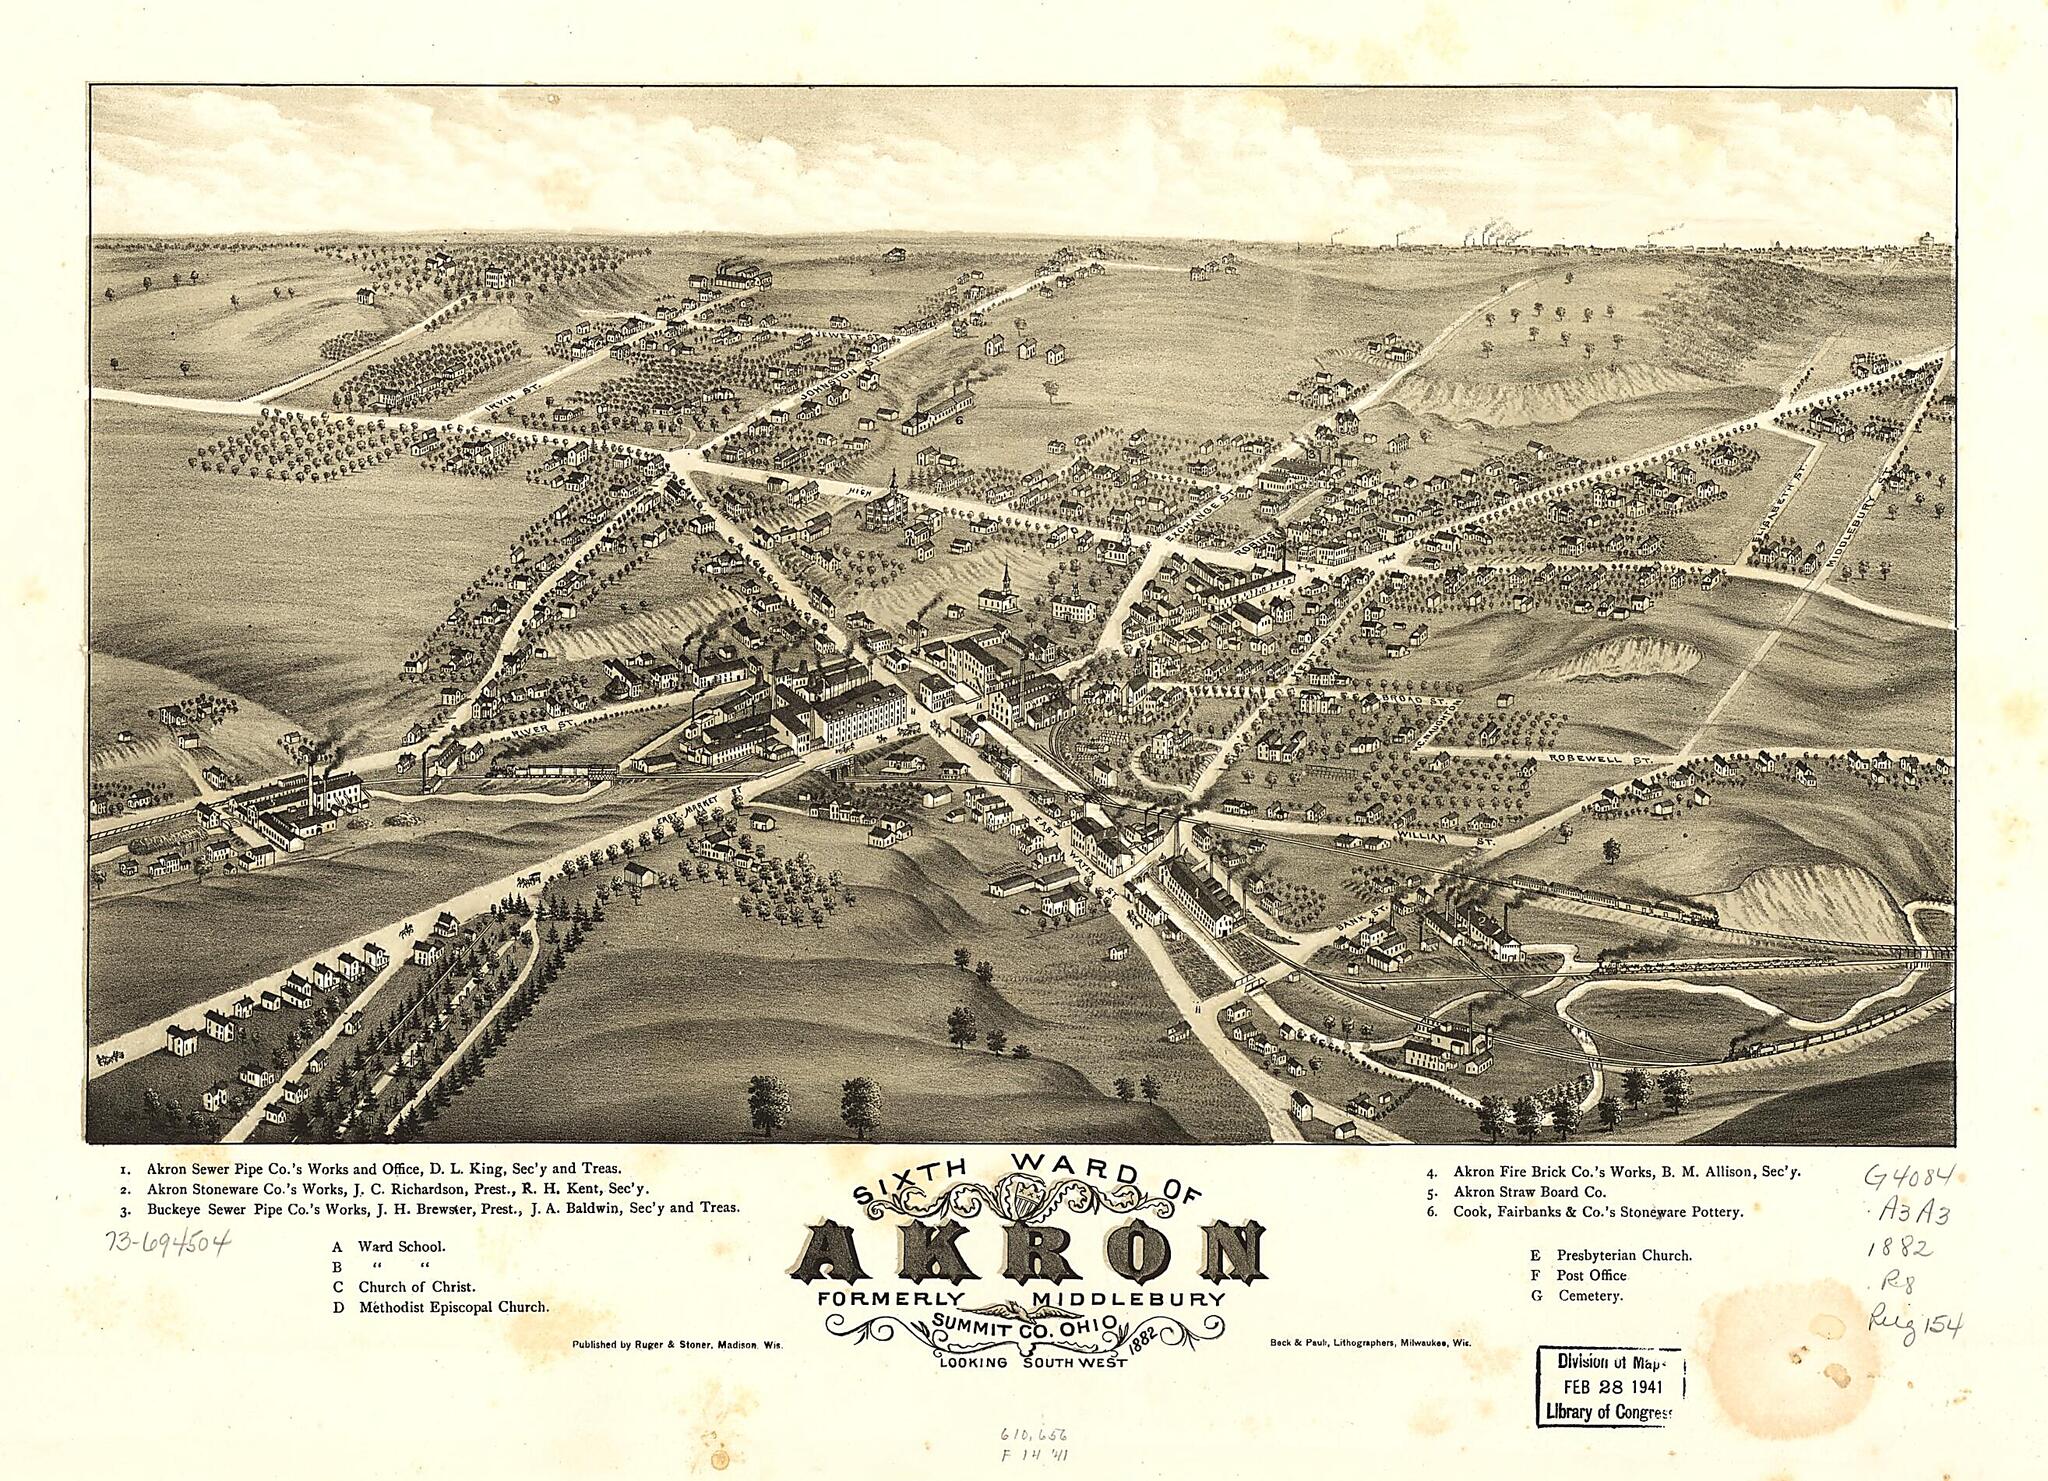 This old map of Sixth Ward of Akron, Formerly Middlebury, Summit County, Ohio from 1882 was created by  Beck &amp; Pauli,  Ruger &amp; Stoner, A. Ruger in 1882